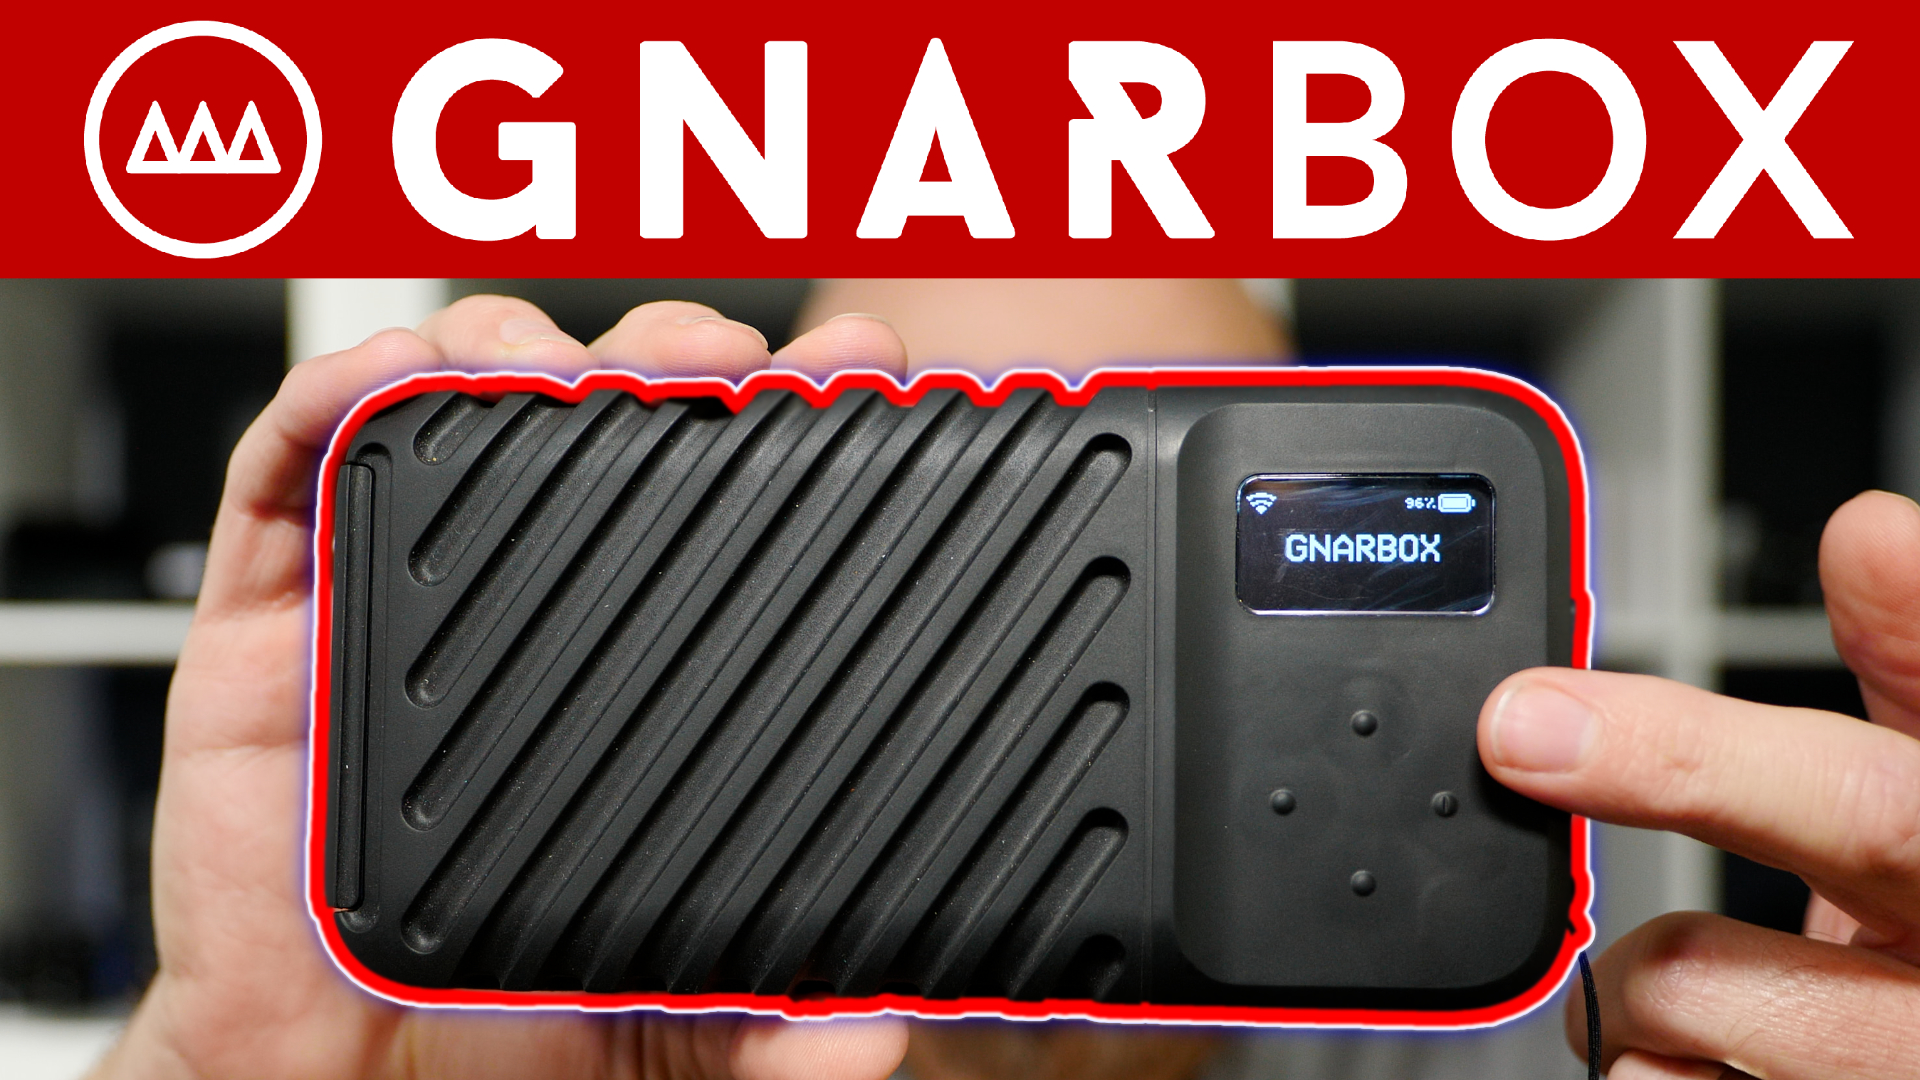 GNARBOX 2 — Do PHOTOGRAPHERS Need This?